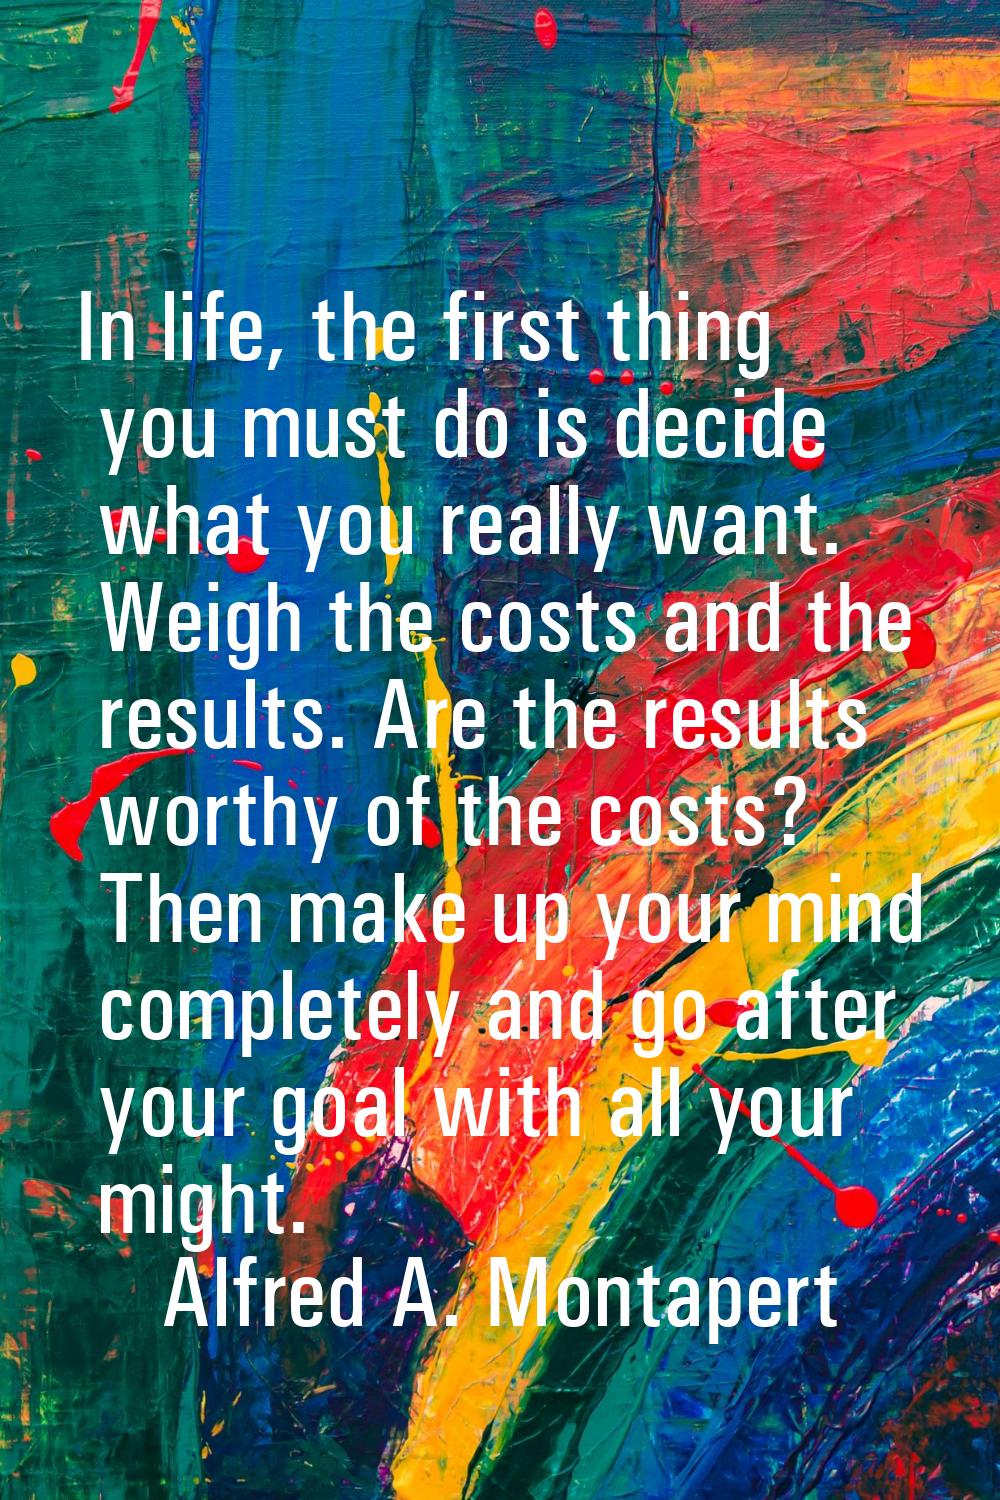 In life, the first thing you must do is decide what you really want. Weigh the costs and the result